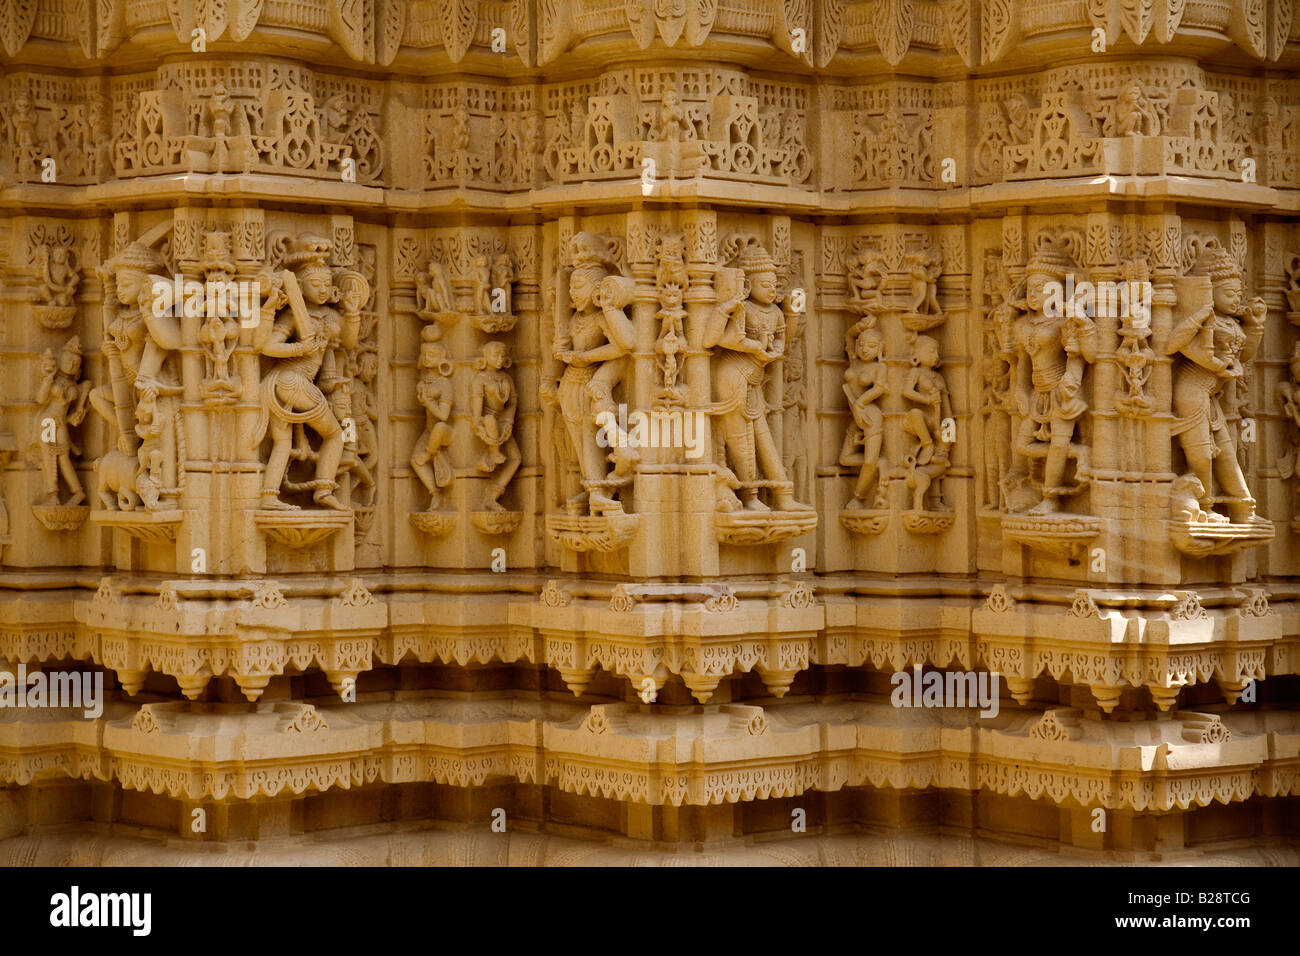 Hand carved GOLDED SANDSTONE DIVAS or Celestial Beings inside a JAIN TEMPLE in the JAISALMER FORT RAJASTHAN INDIA Stock Photo